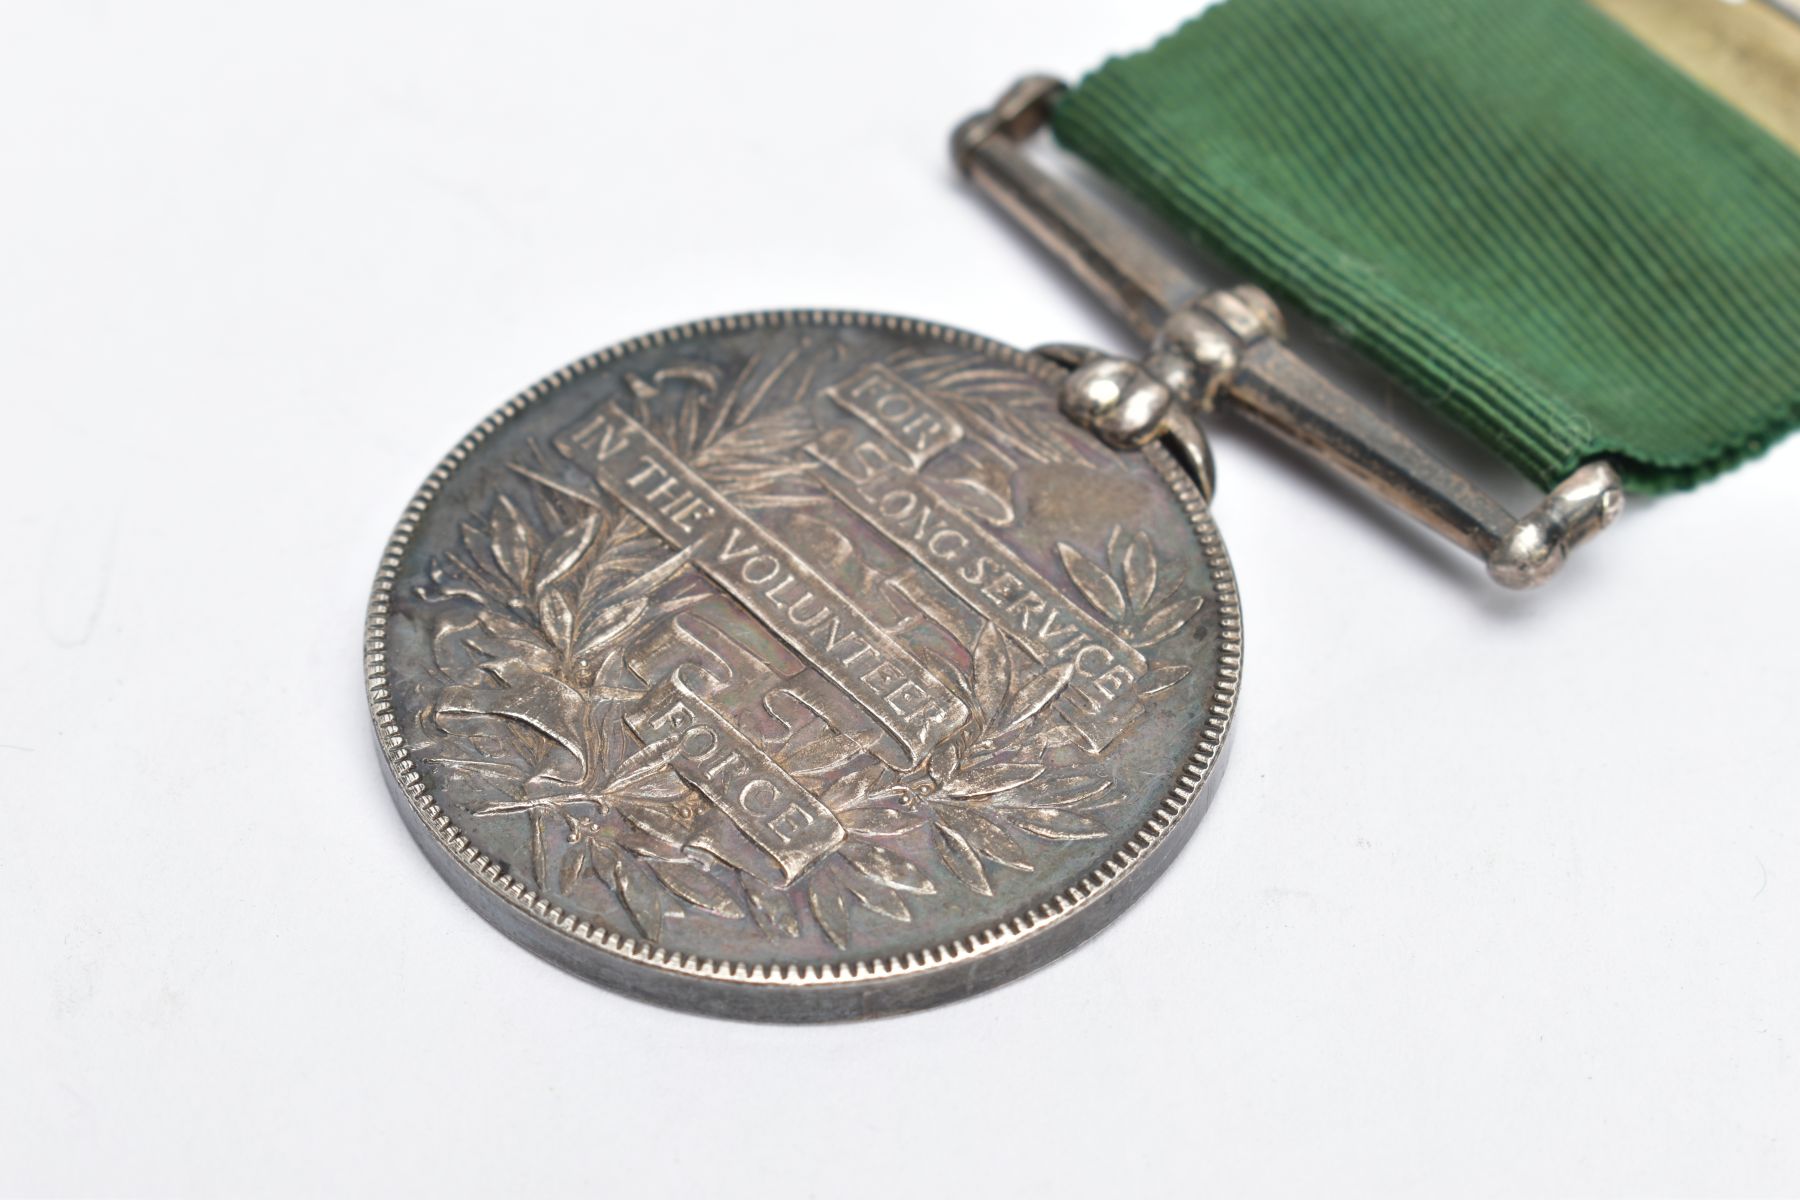 UN-NAMED EXAMPLE OF VICTORIA VOLUNTEER FORCE MEDAL, Victoria Regina Crowned head for Long service in - Image 6 of 6